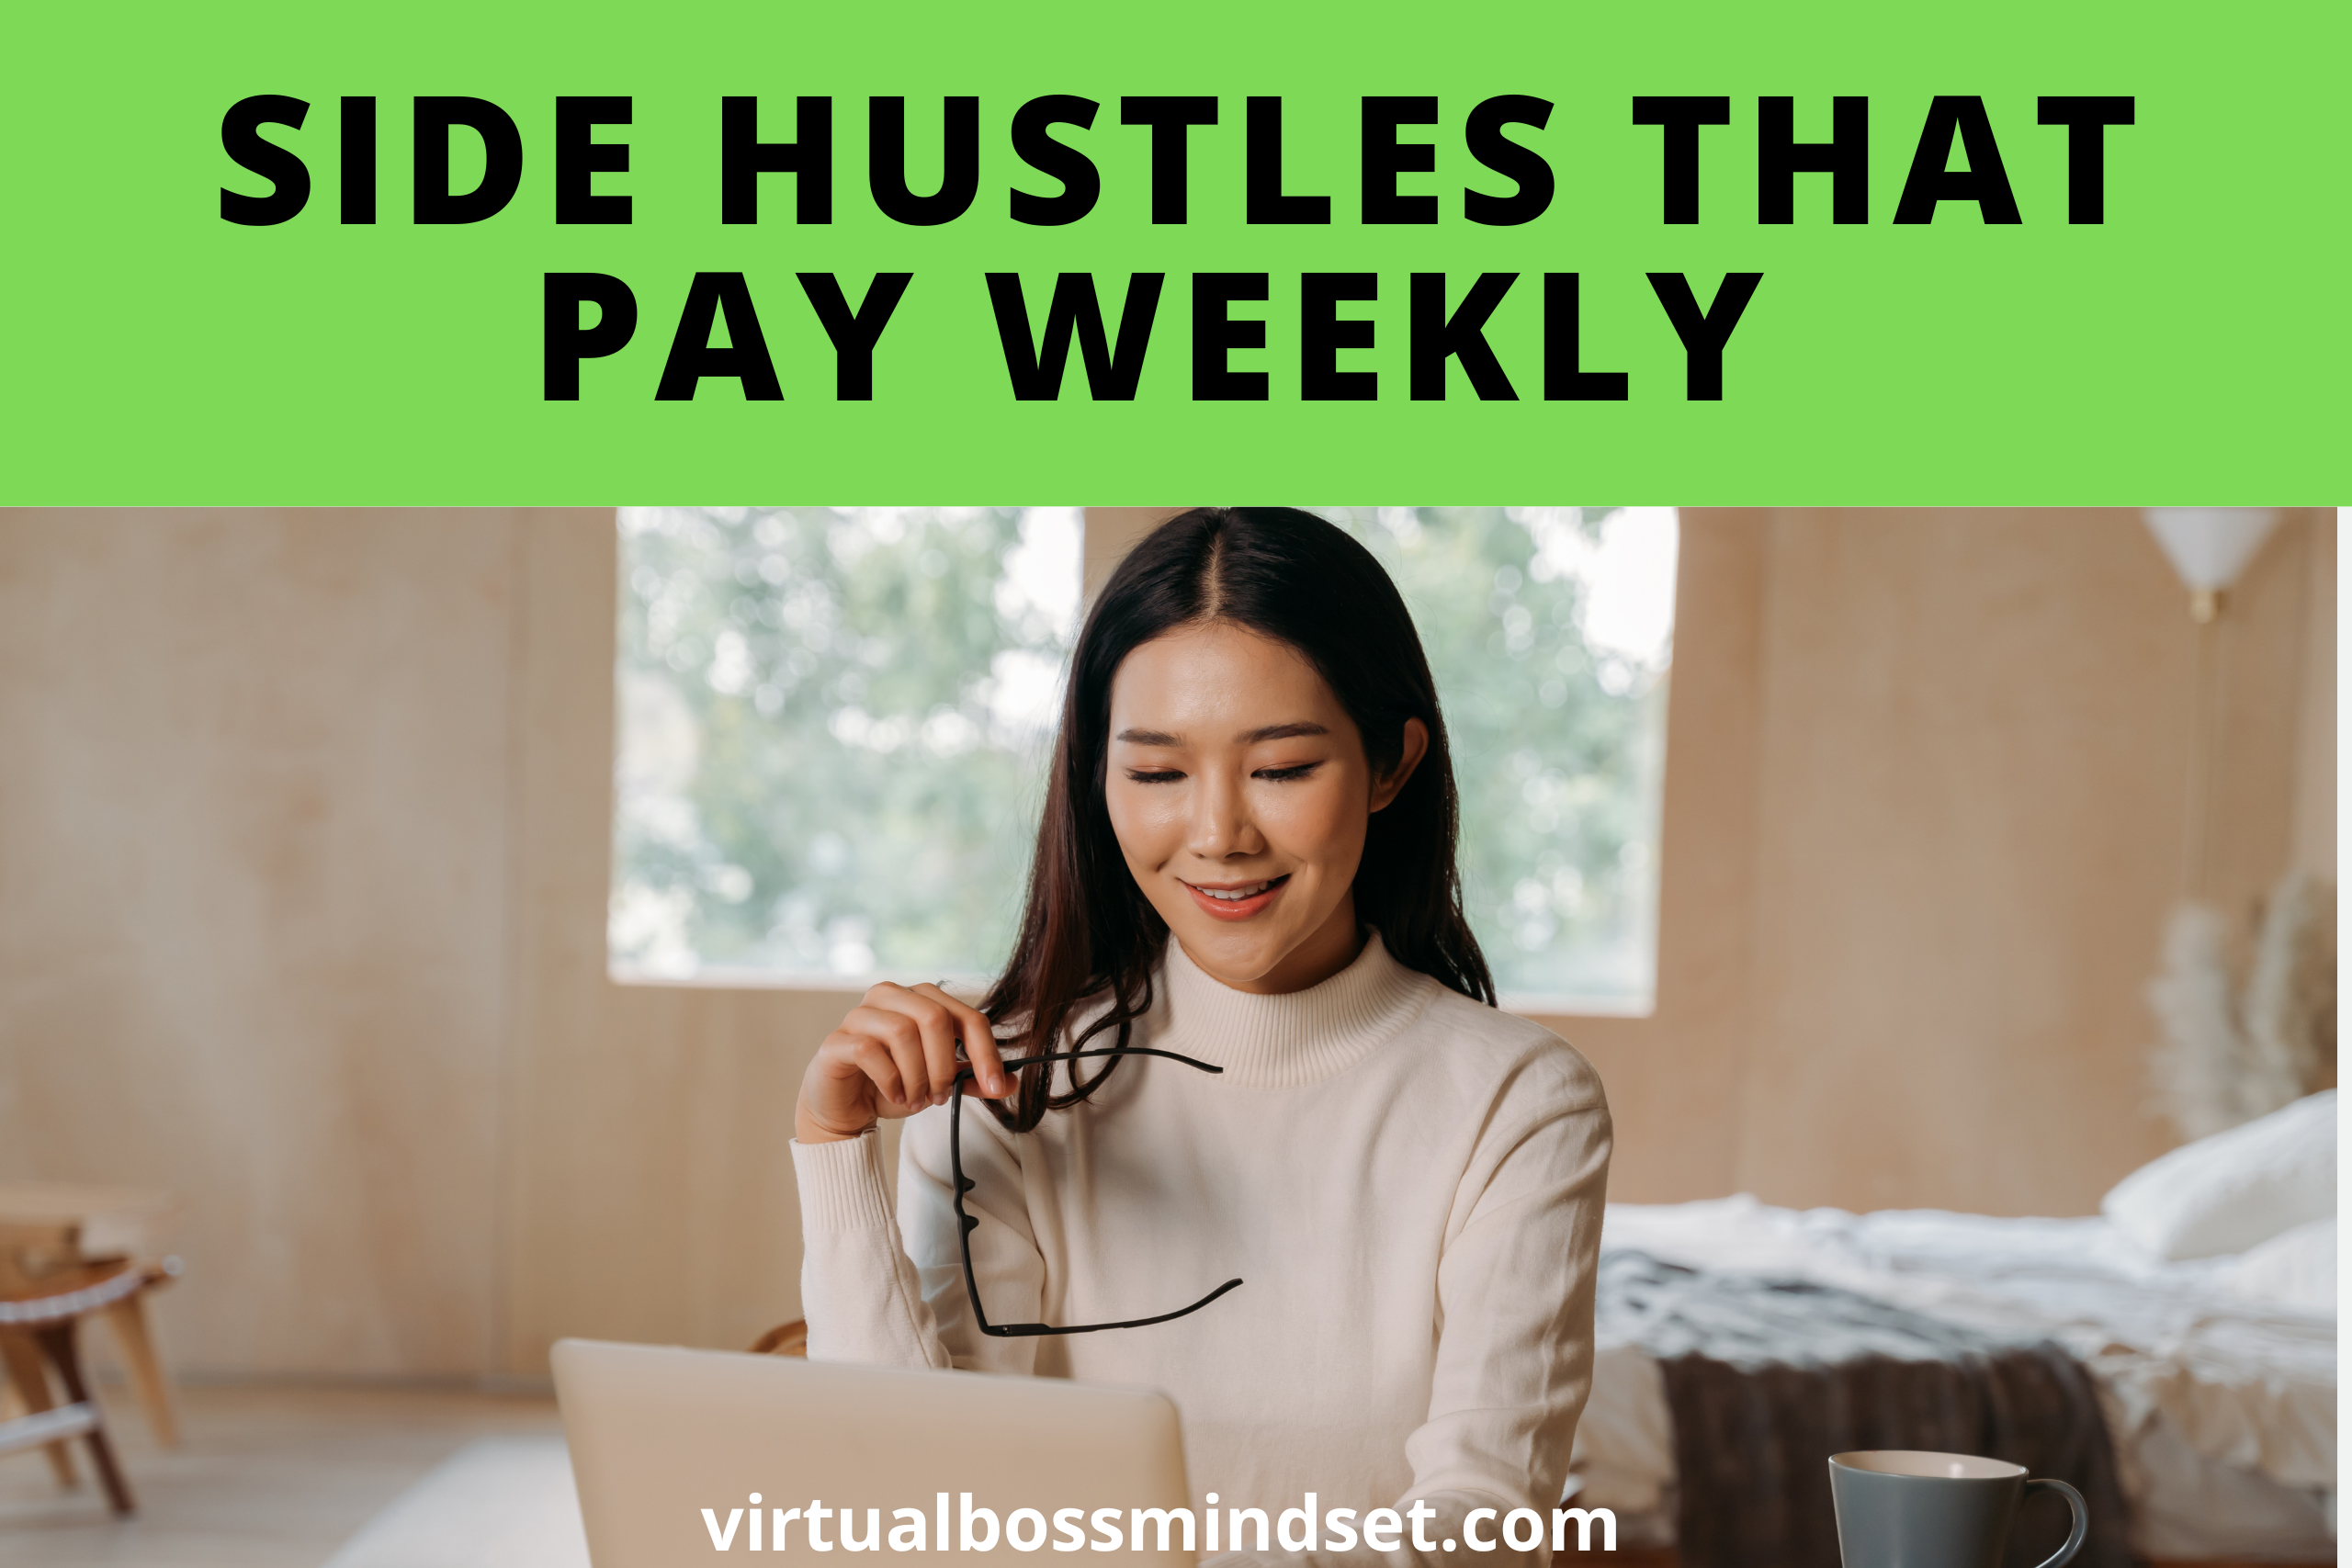 15 Side Hustles that Pay Weekly